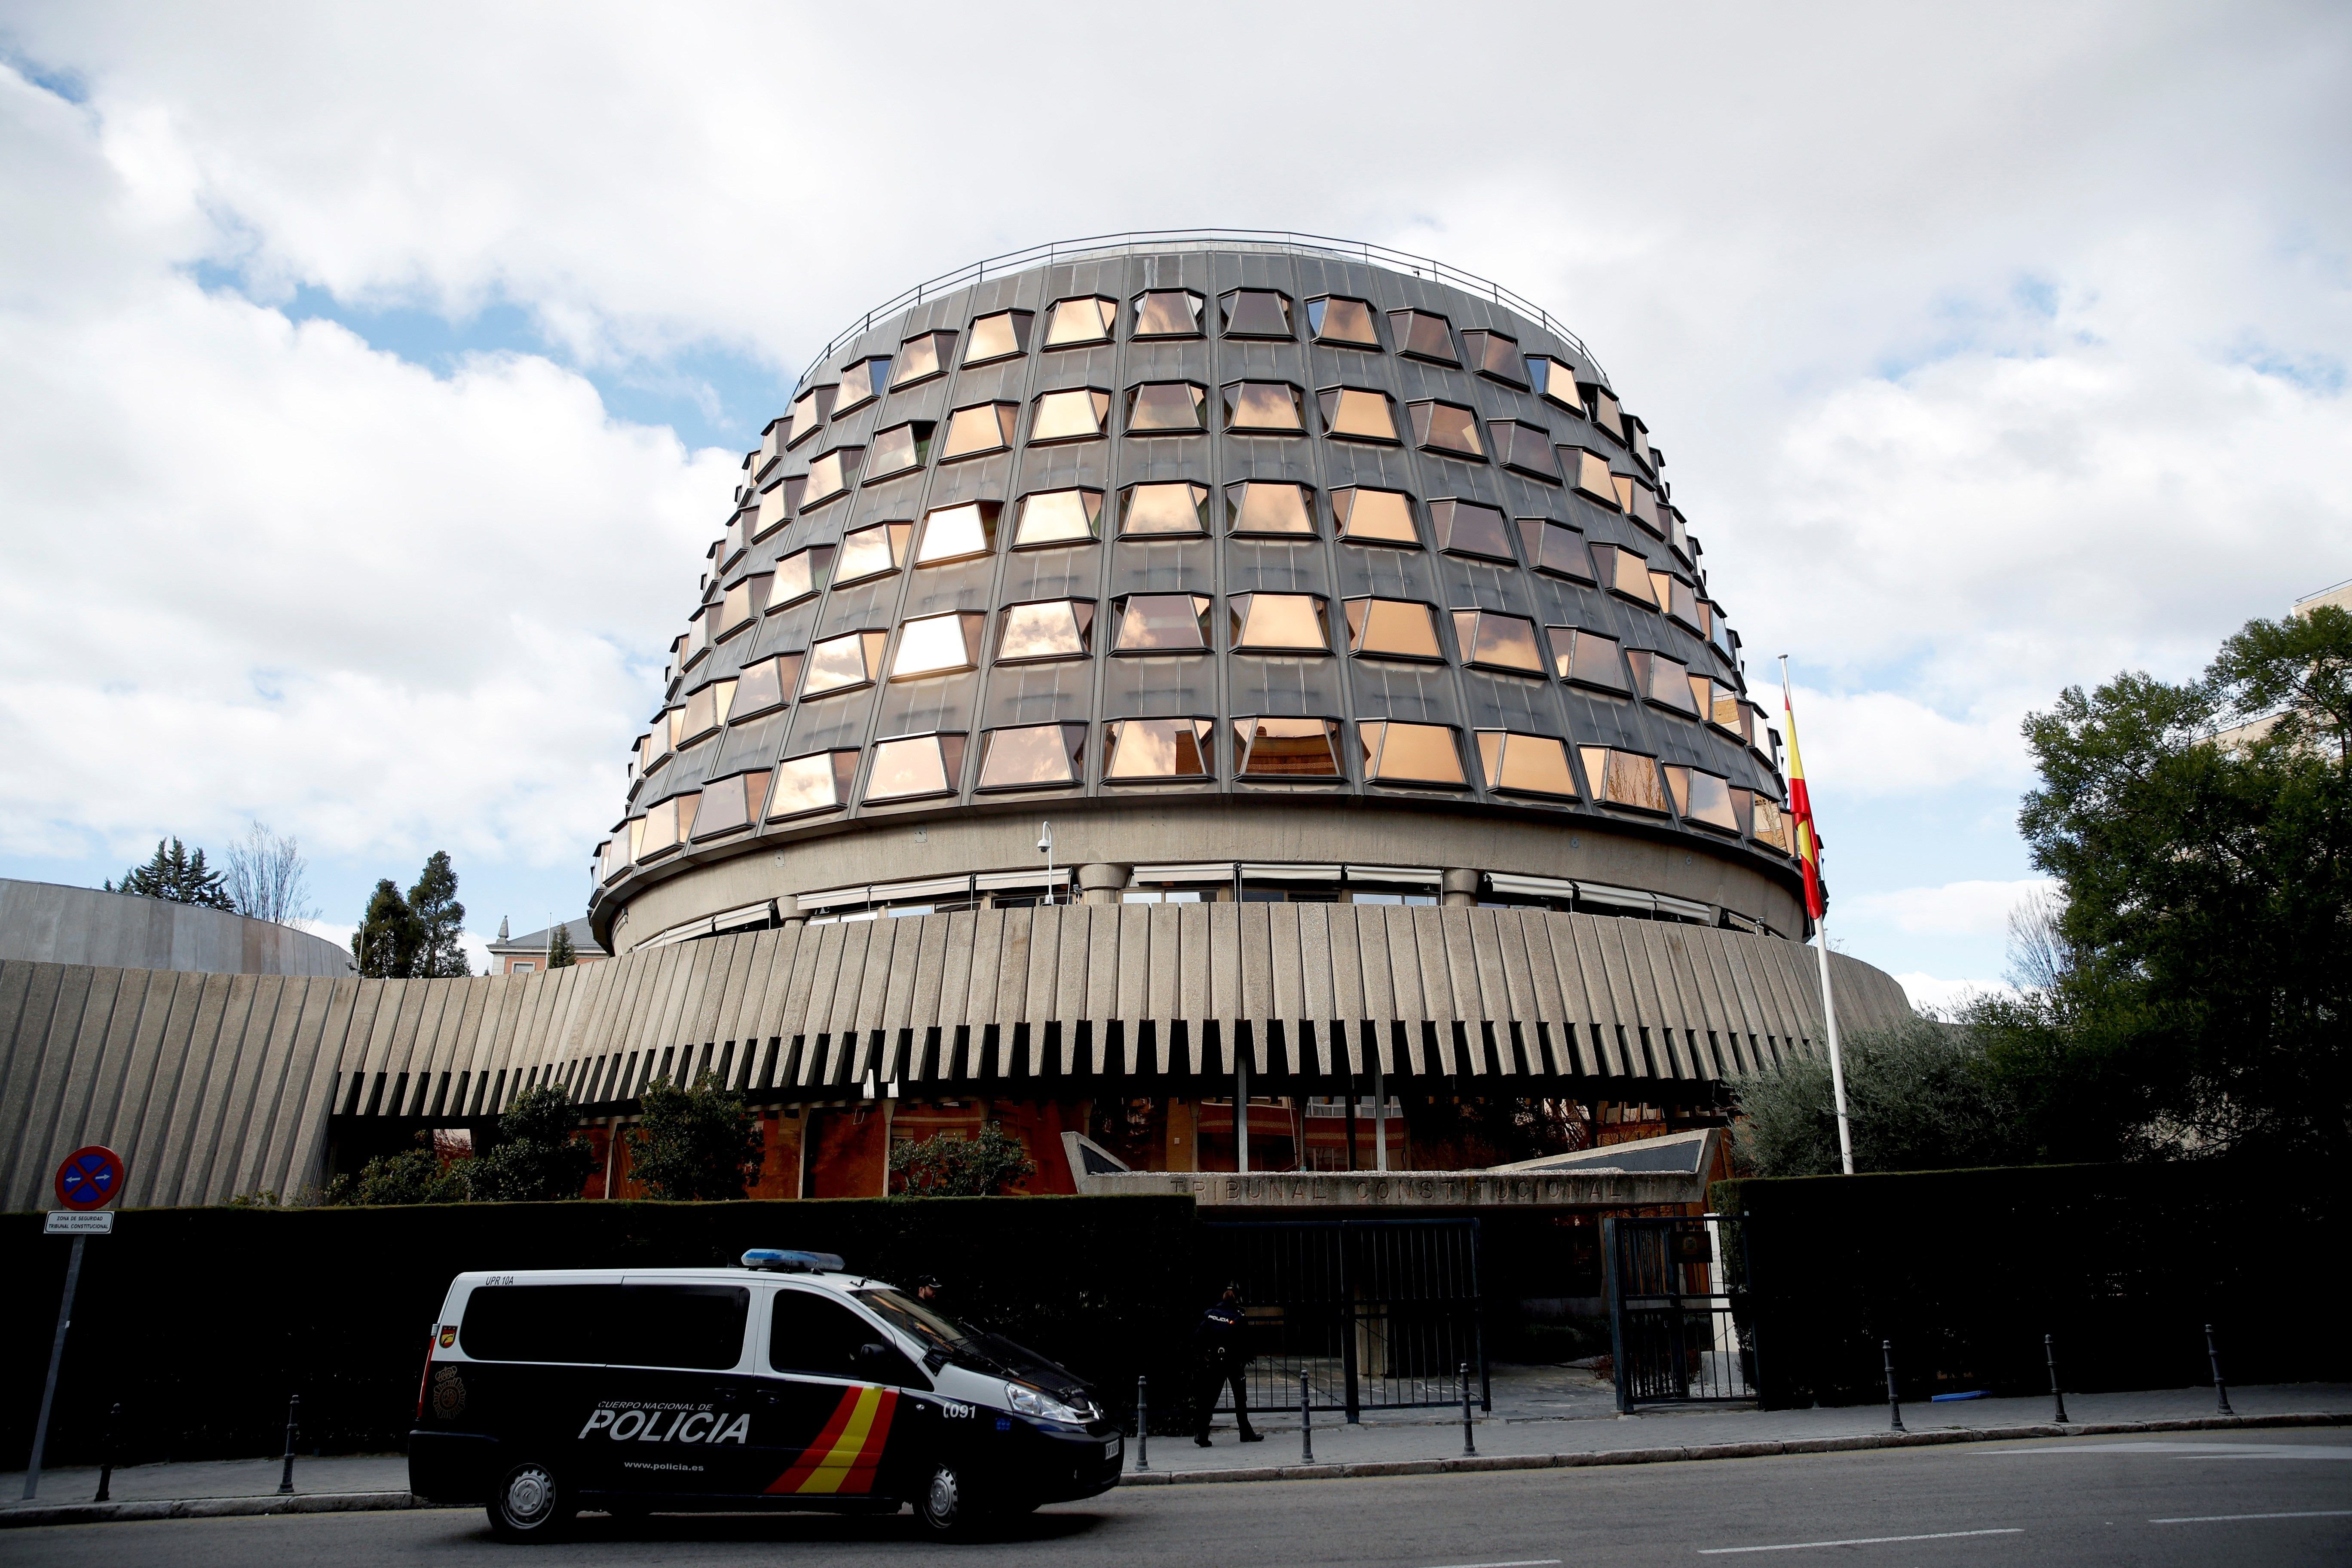 Spain's Constitutional Court upholds its decision over presidential investiture